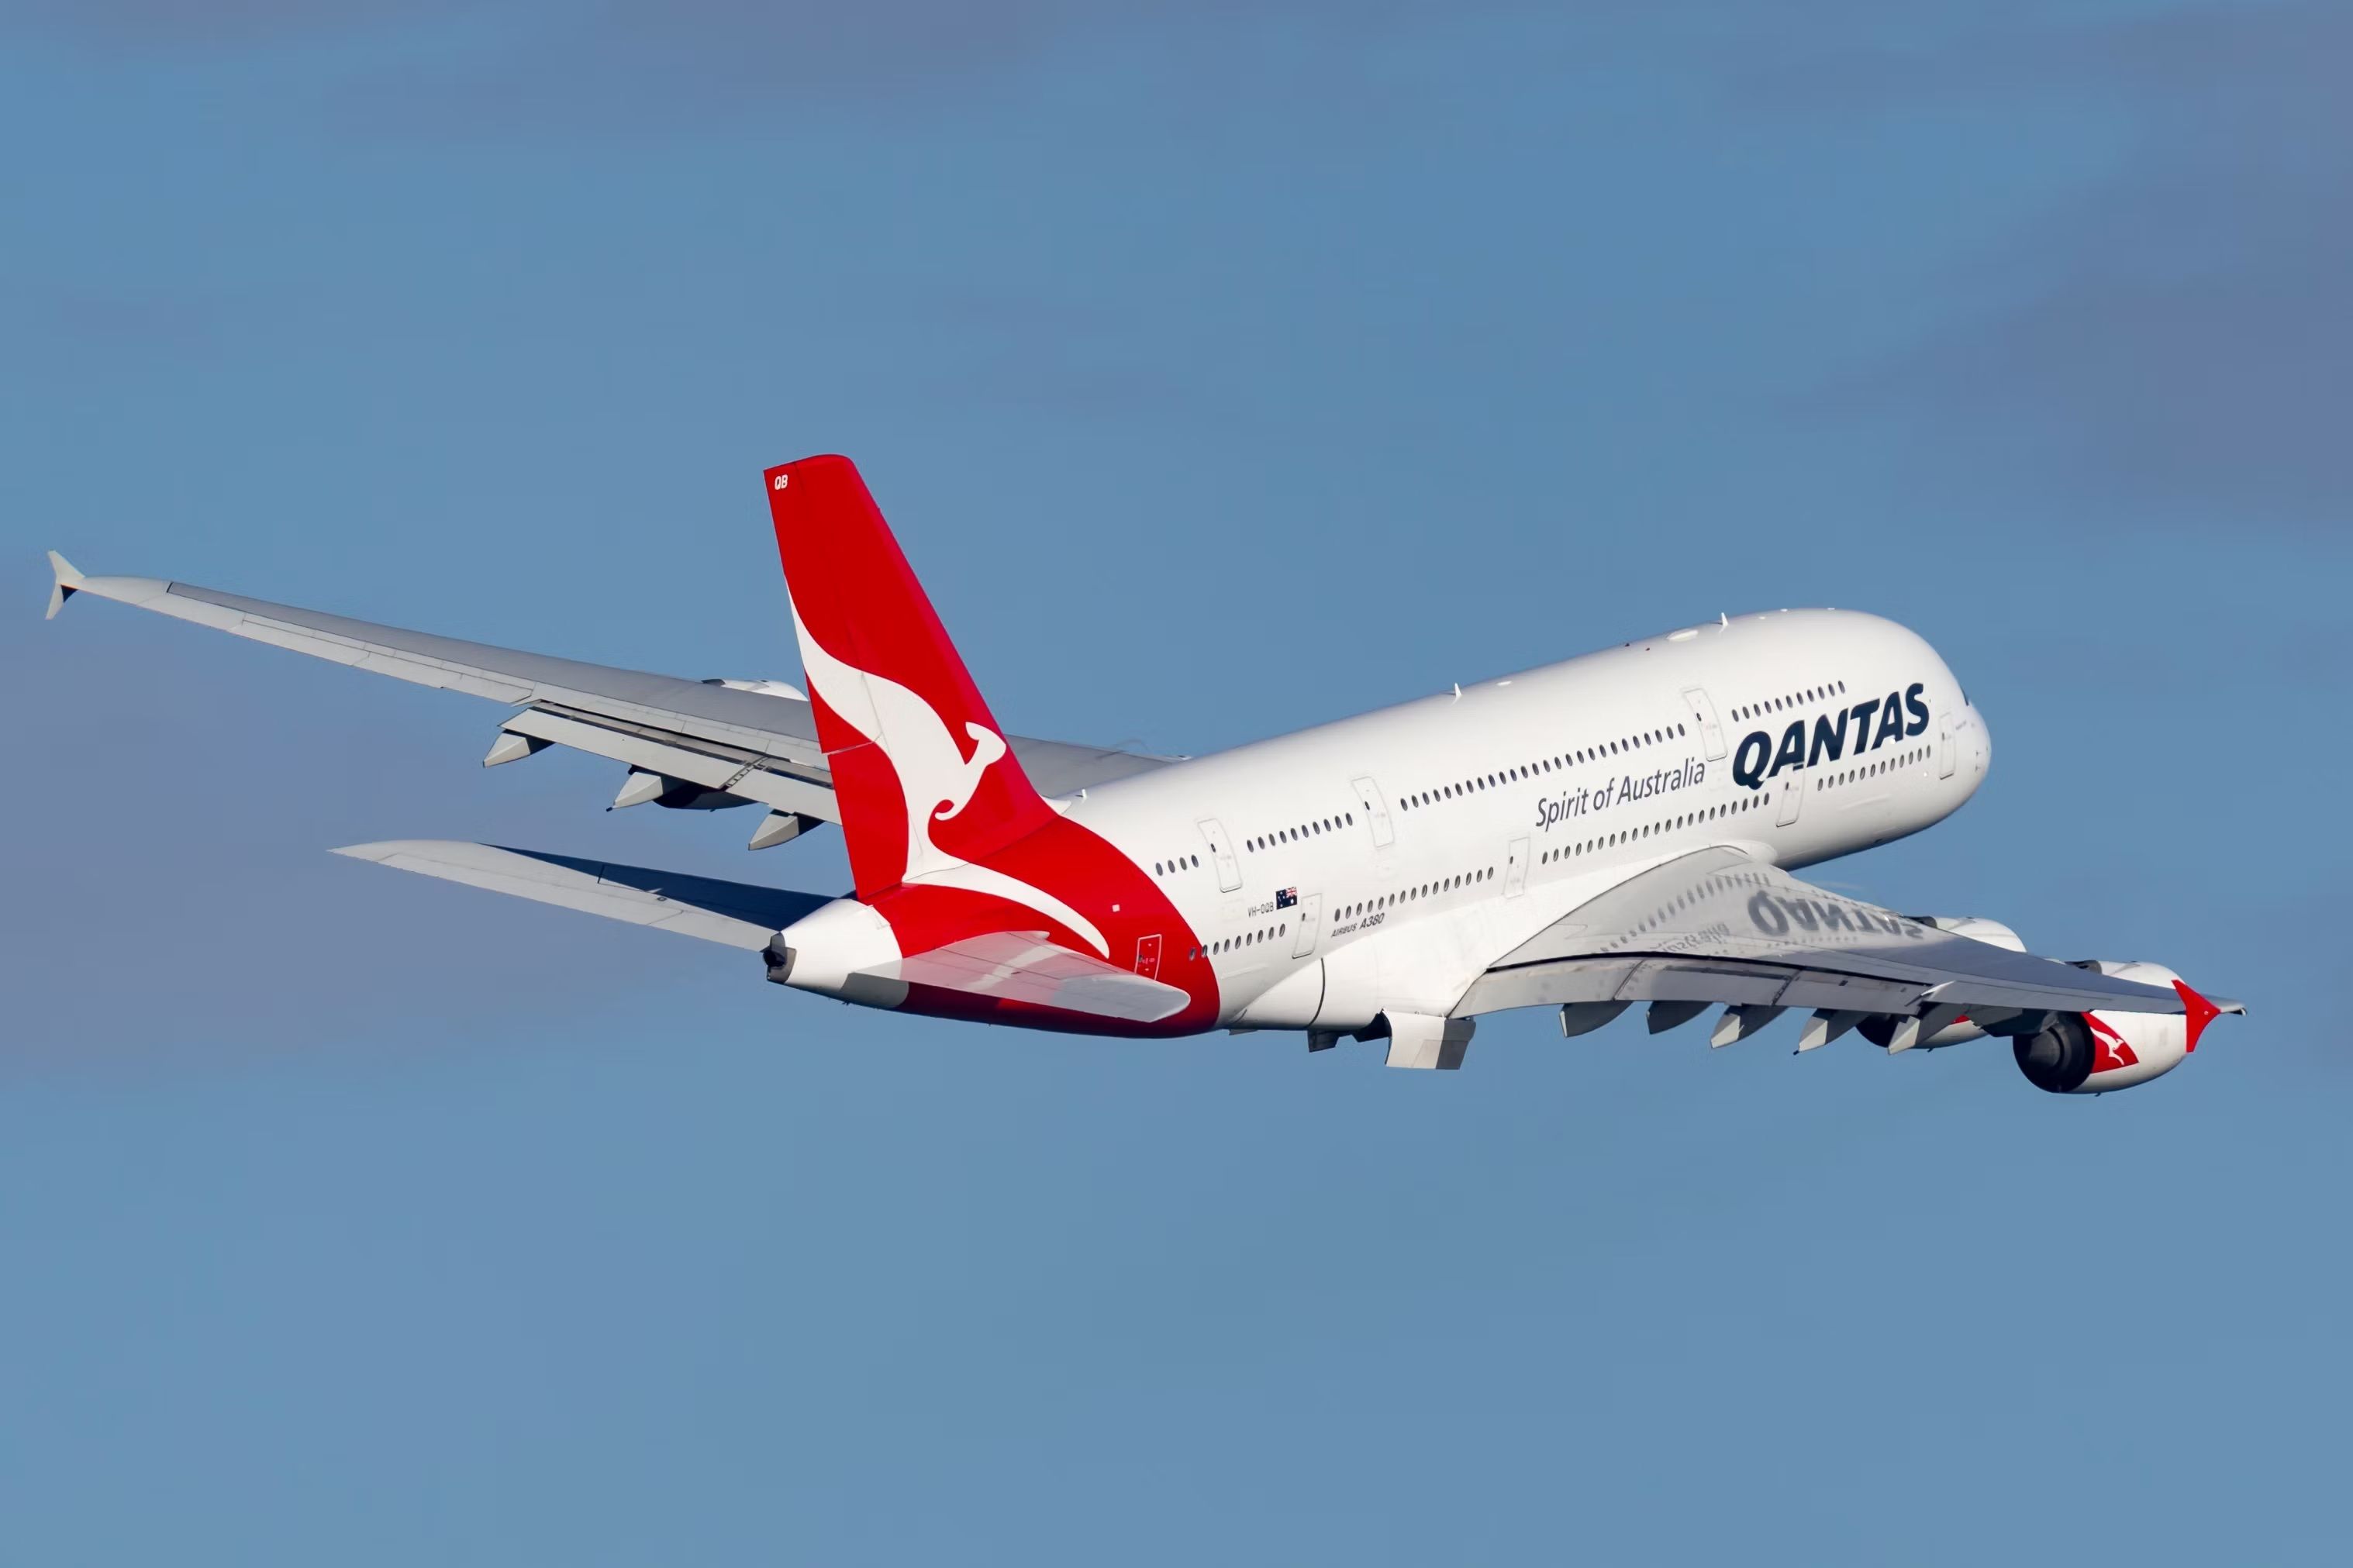 A Qantas Airbus A380 flying in the sky.